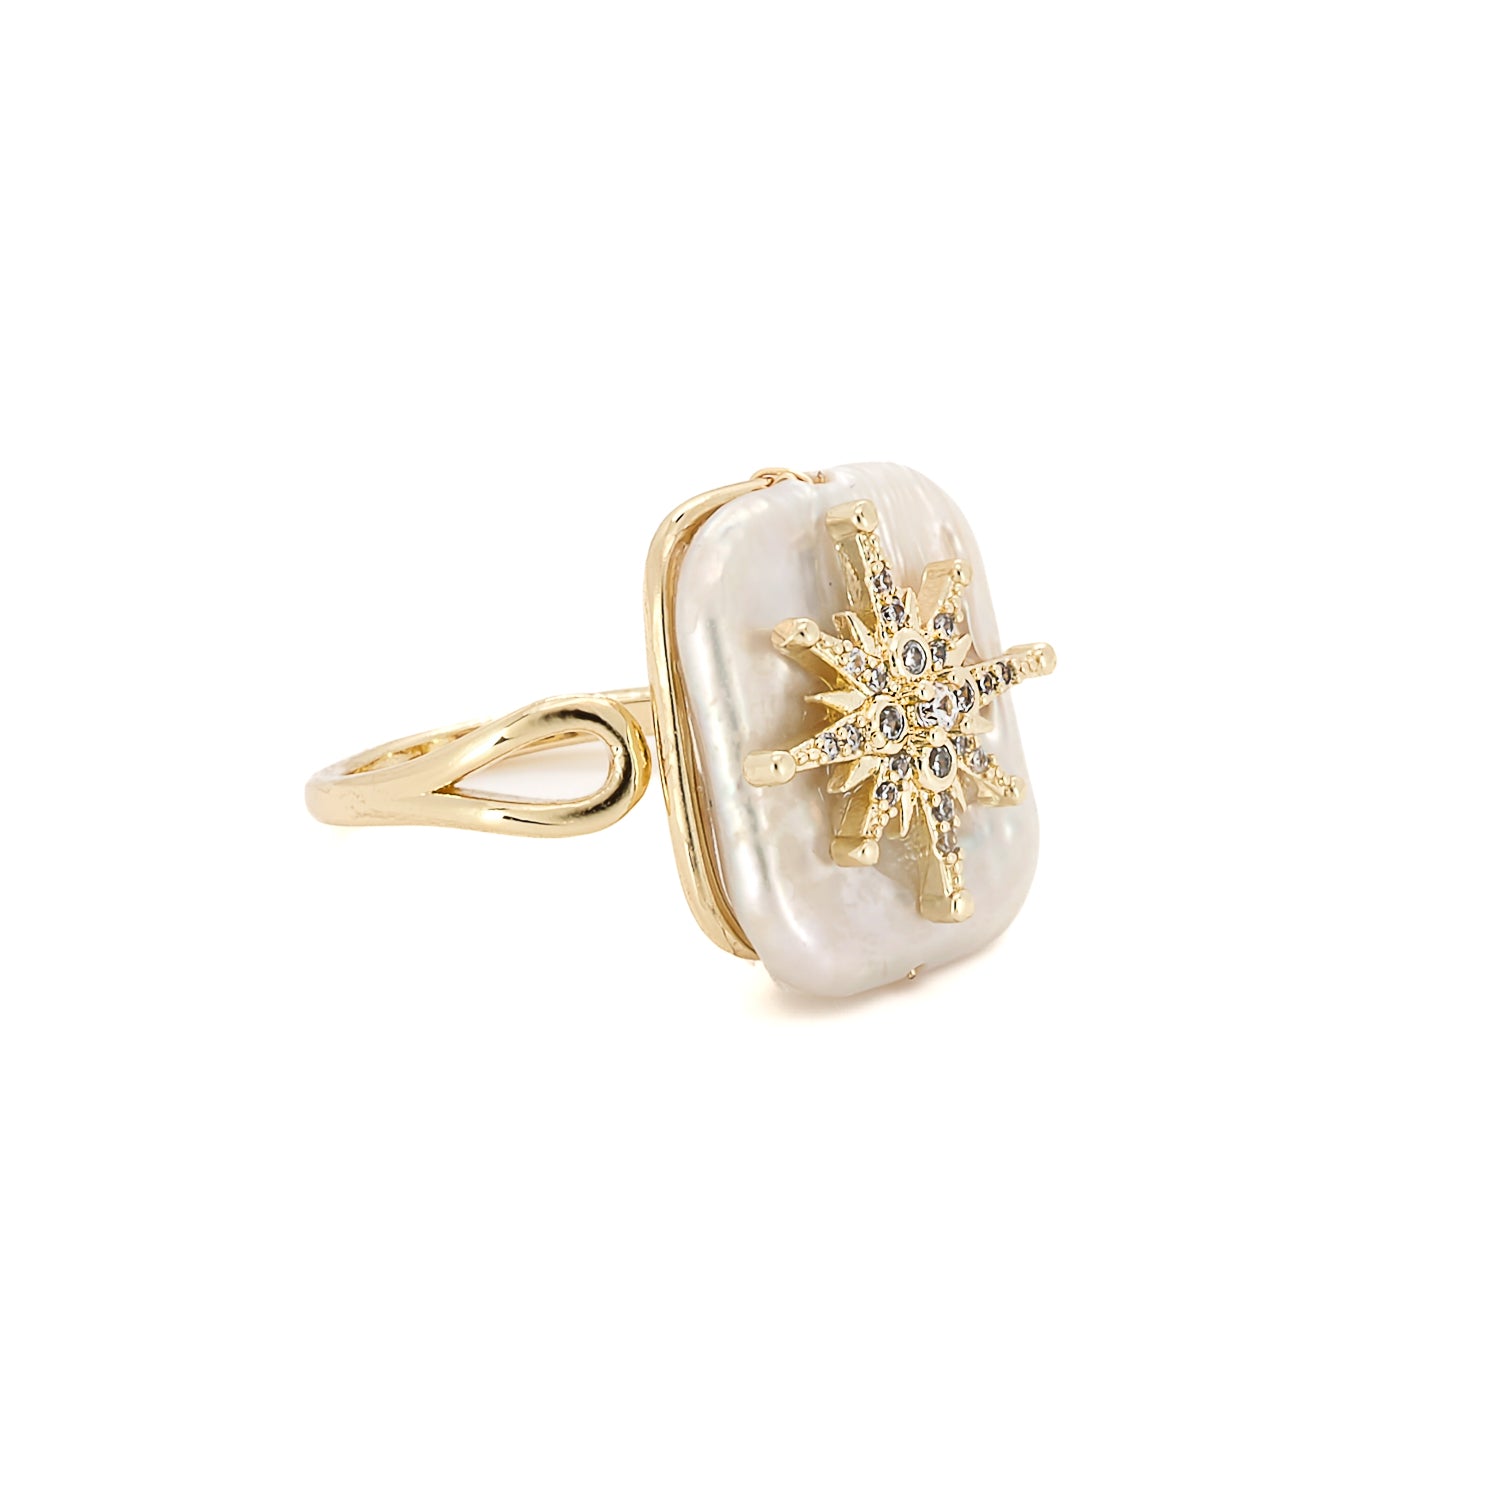 Discover the allure of queens and luminaries through this elegant ring.